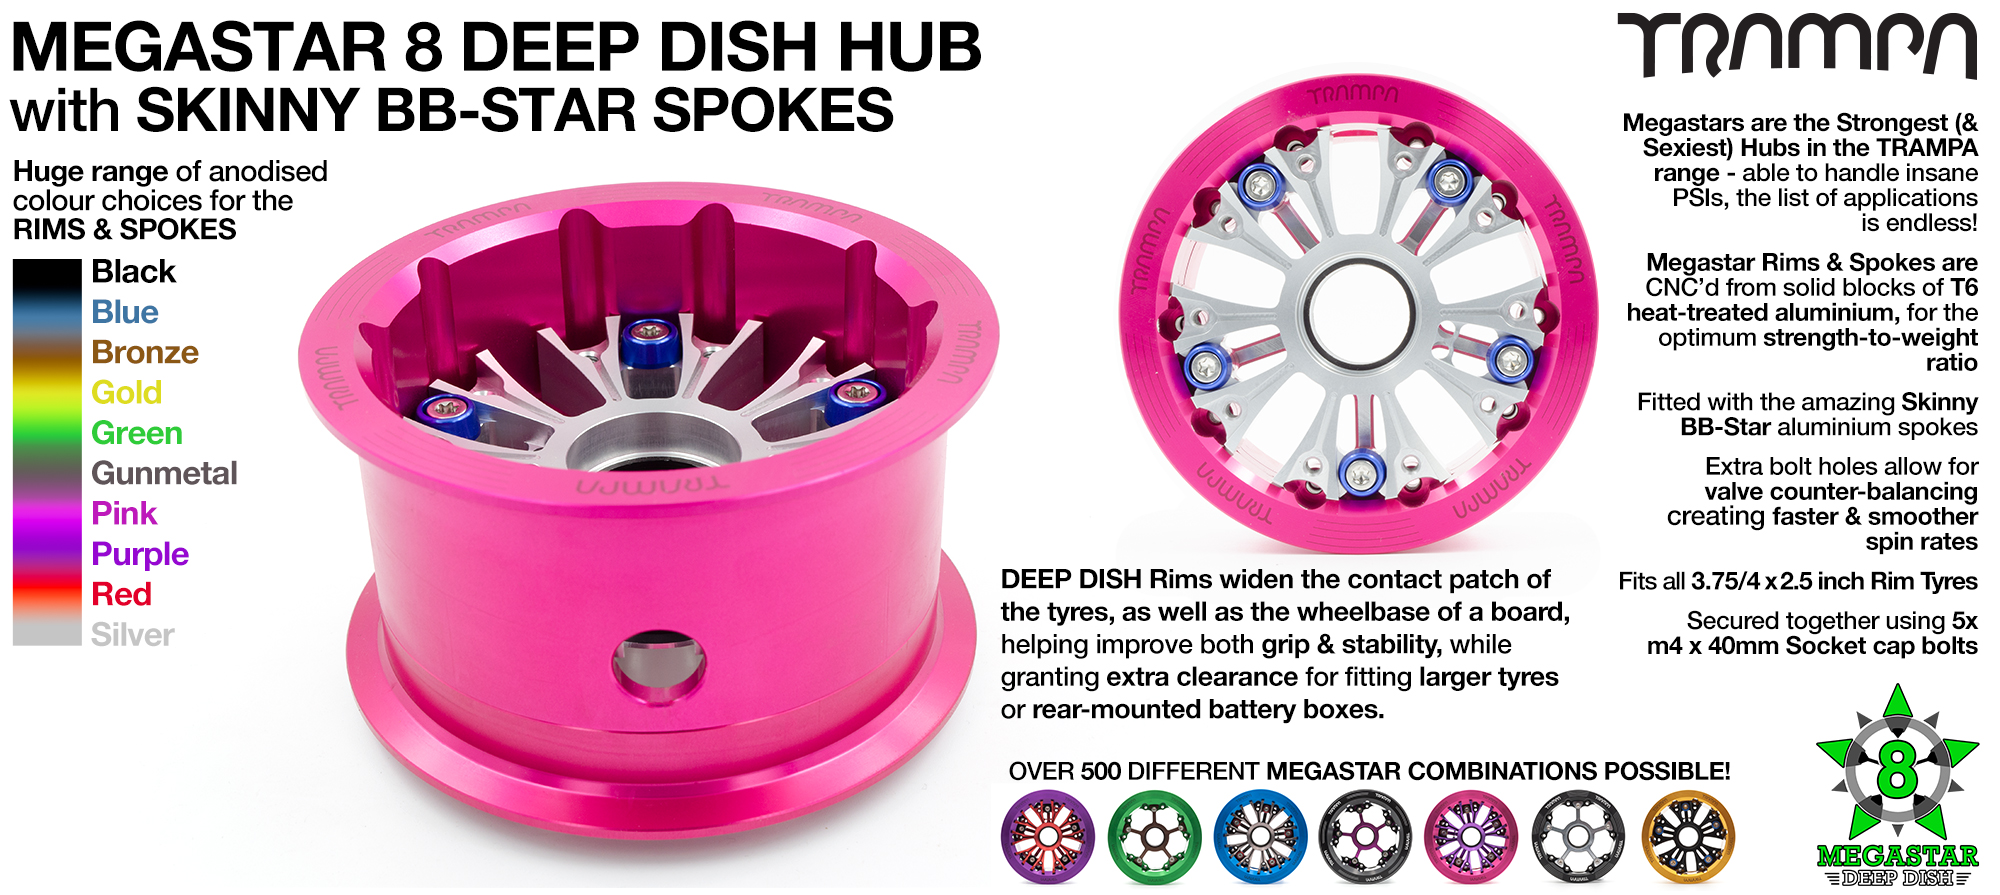 Deep-Dish MEGASTAR 8 PINK 3.75 x 2.5 Inch - Fits Pneumatic tyres up to 8 Inches in outer diameter fits with all of TRAMPA's